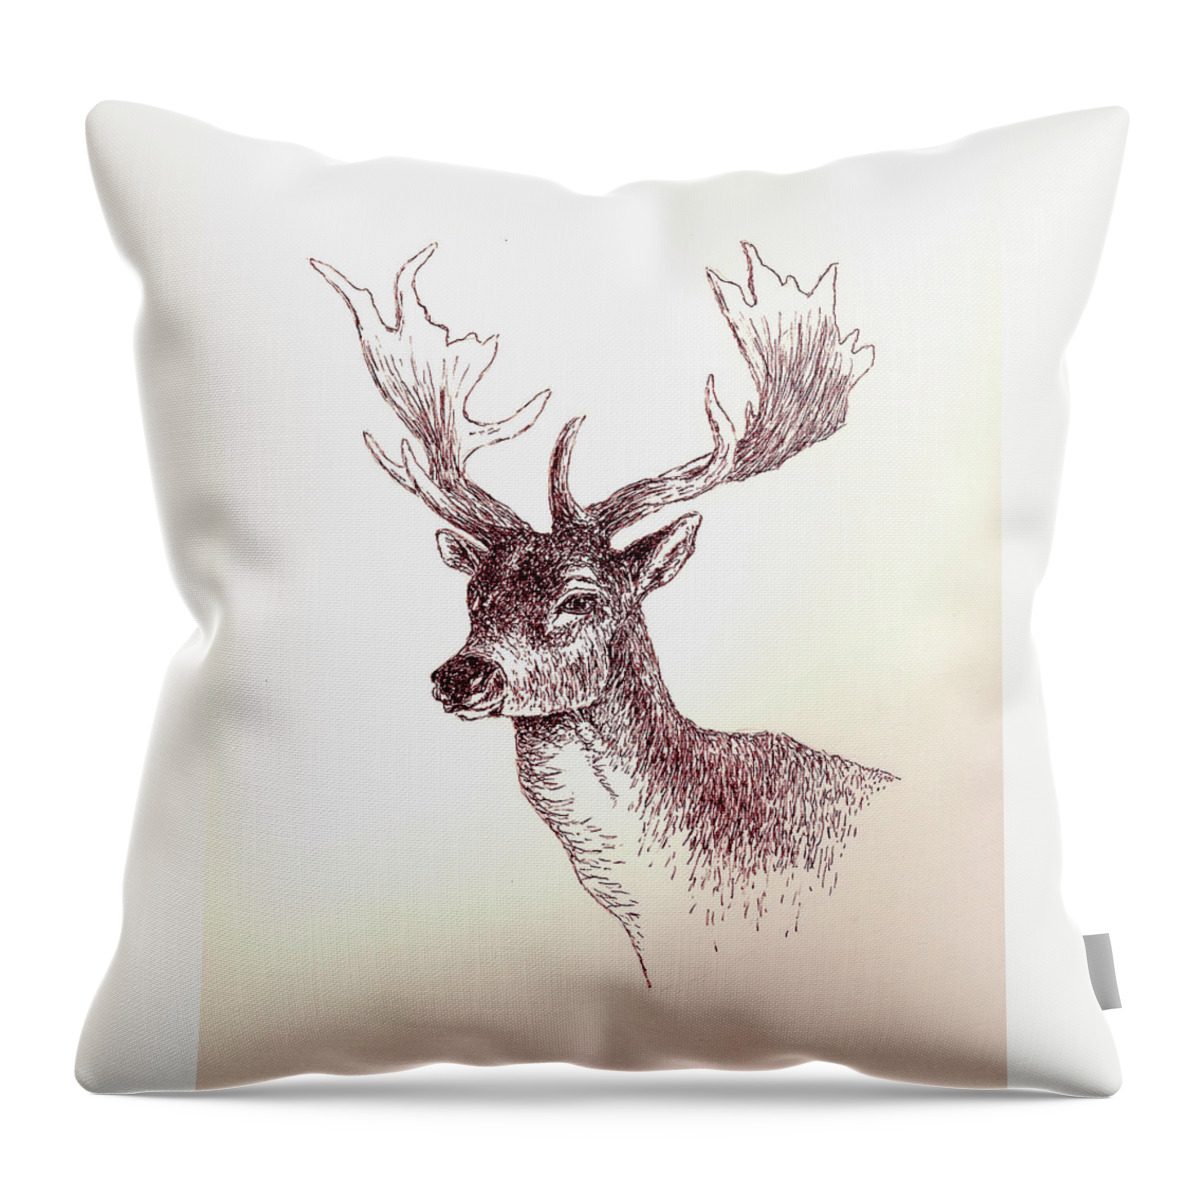 Deer Throw Pillow featuring the painting Deer In Ink by Michael Vigliotti